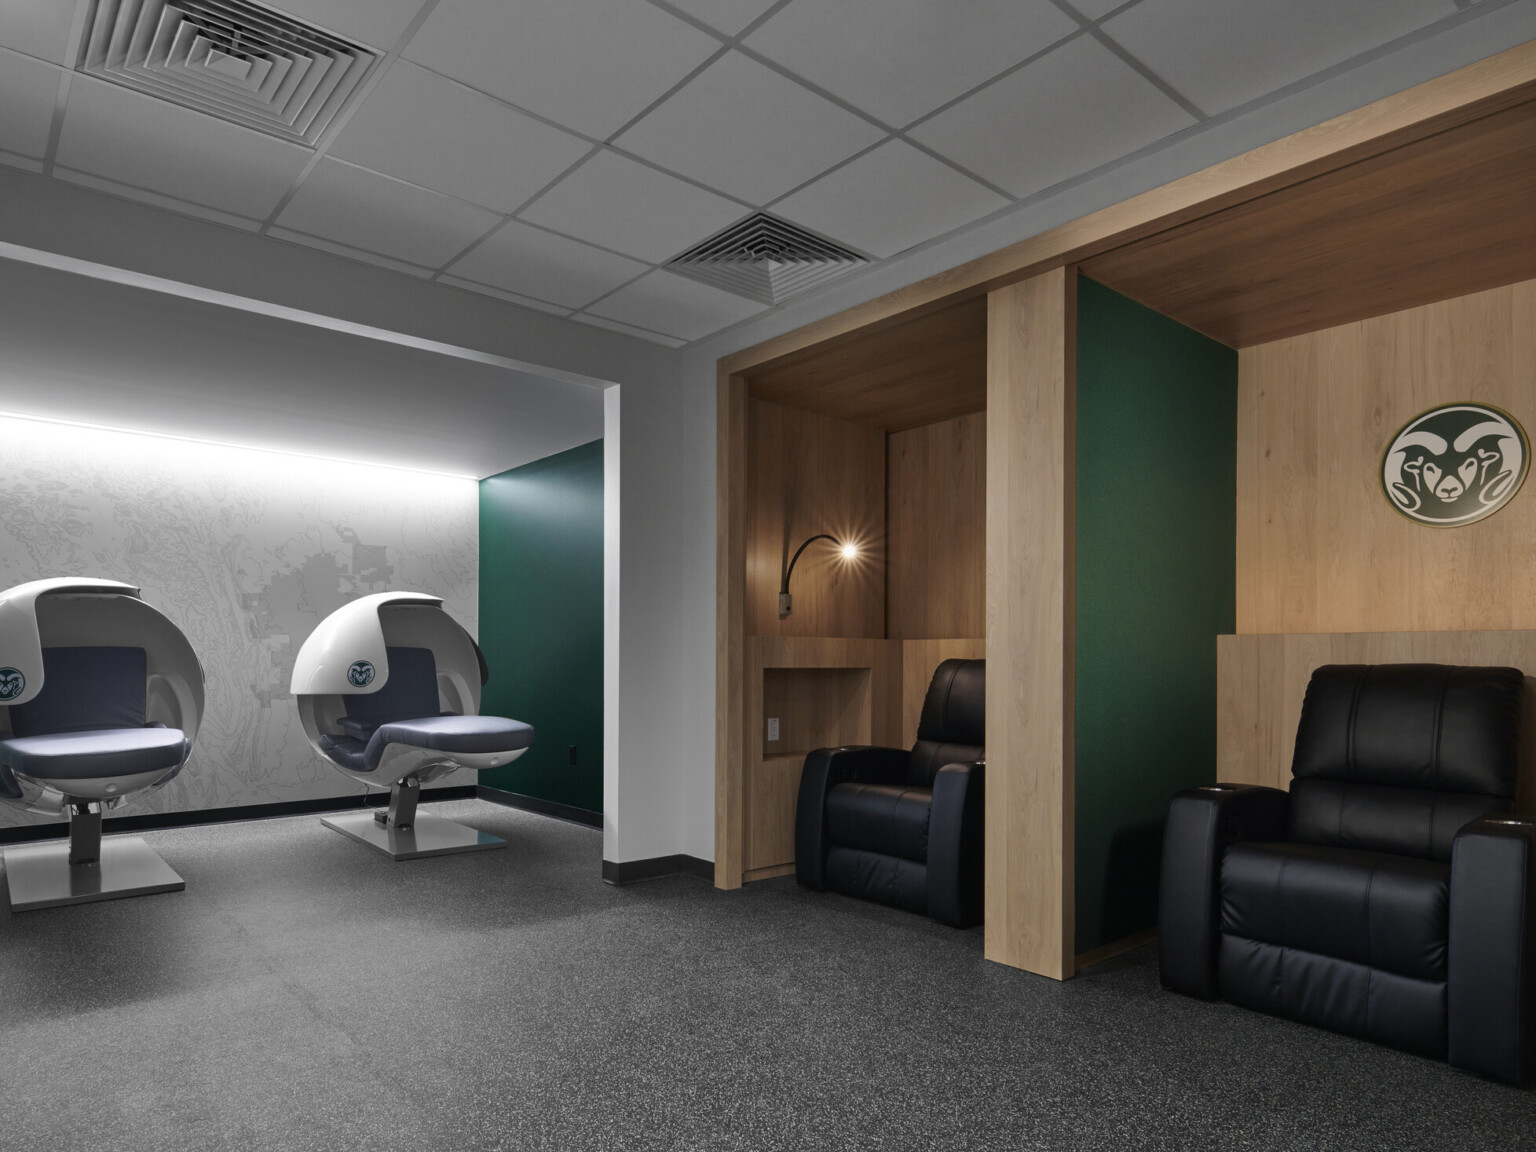 rehab room for athletes, two massage chairs and various other rehab seating, signage on white oak paneled wall